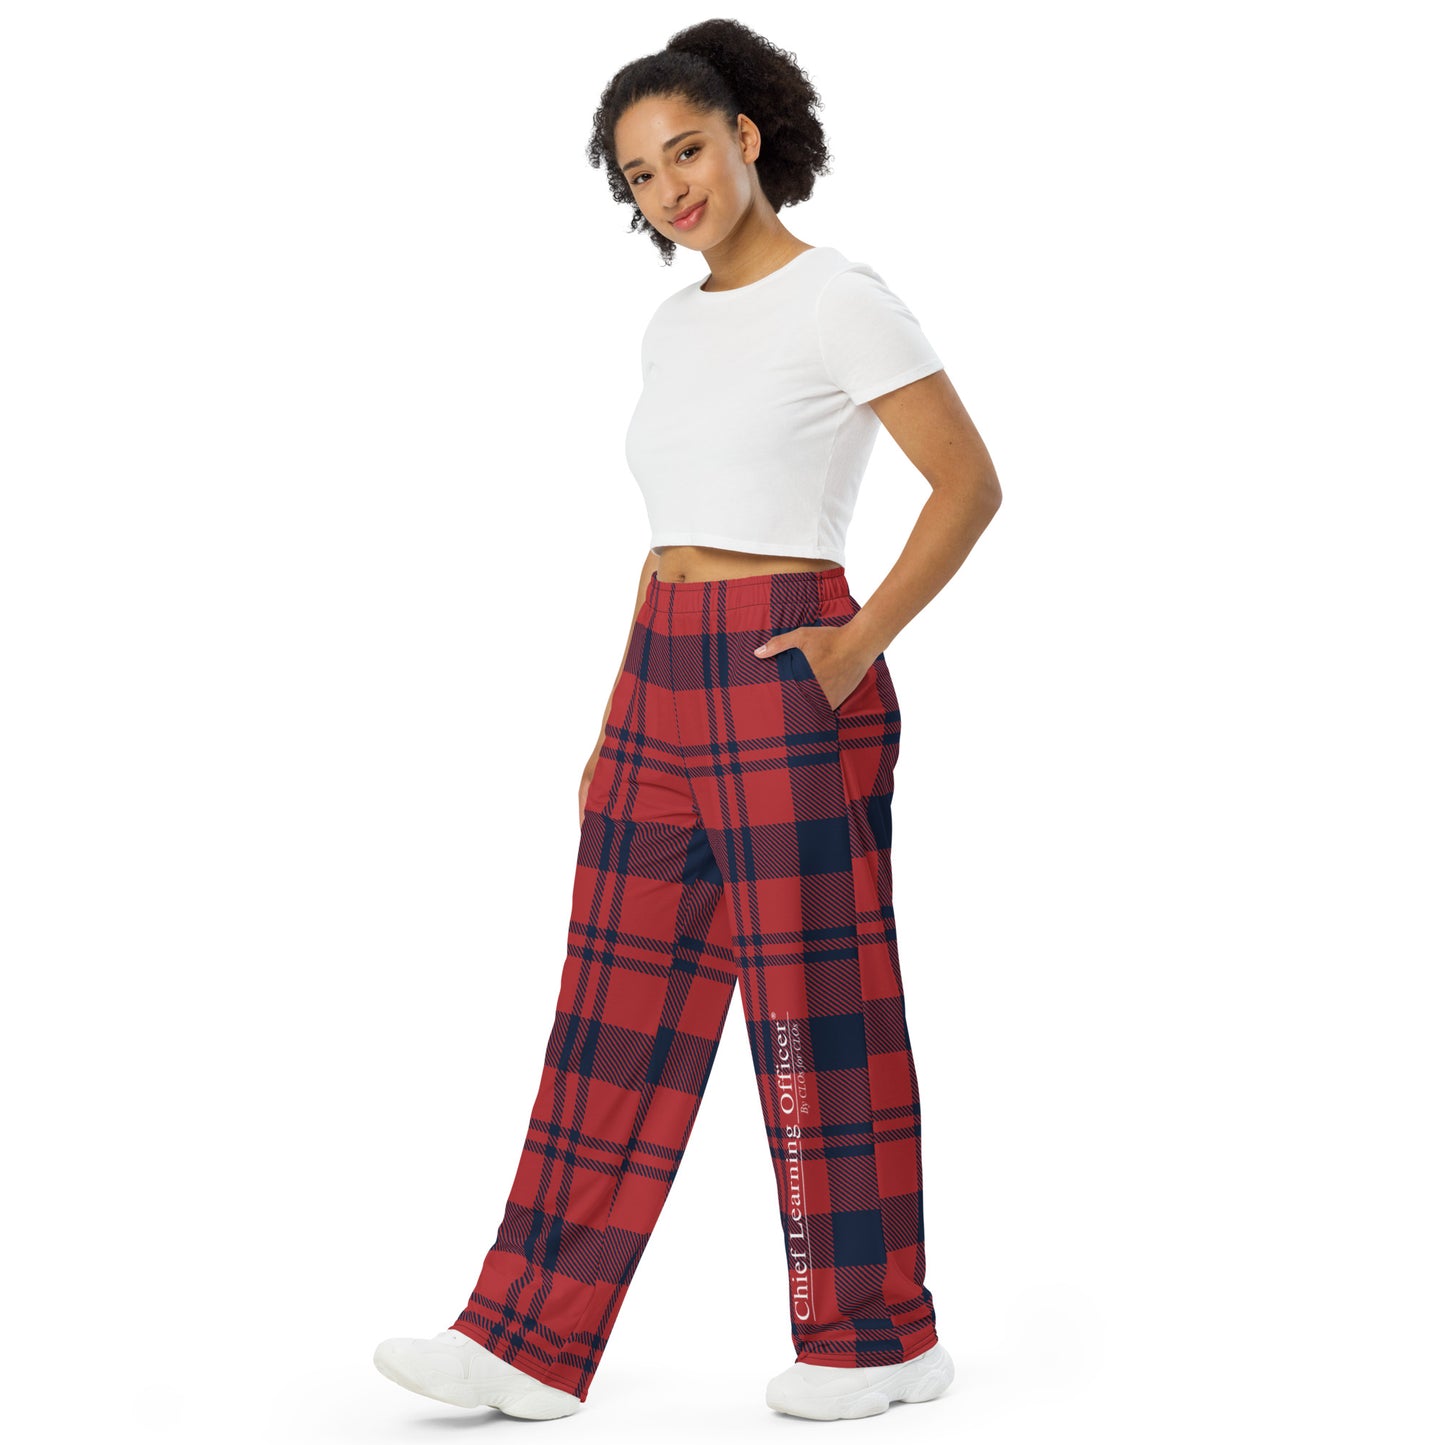 Chief Learning Officer Unisex Pajama Pants